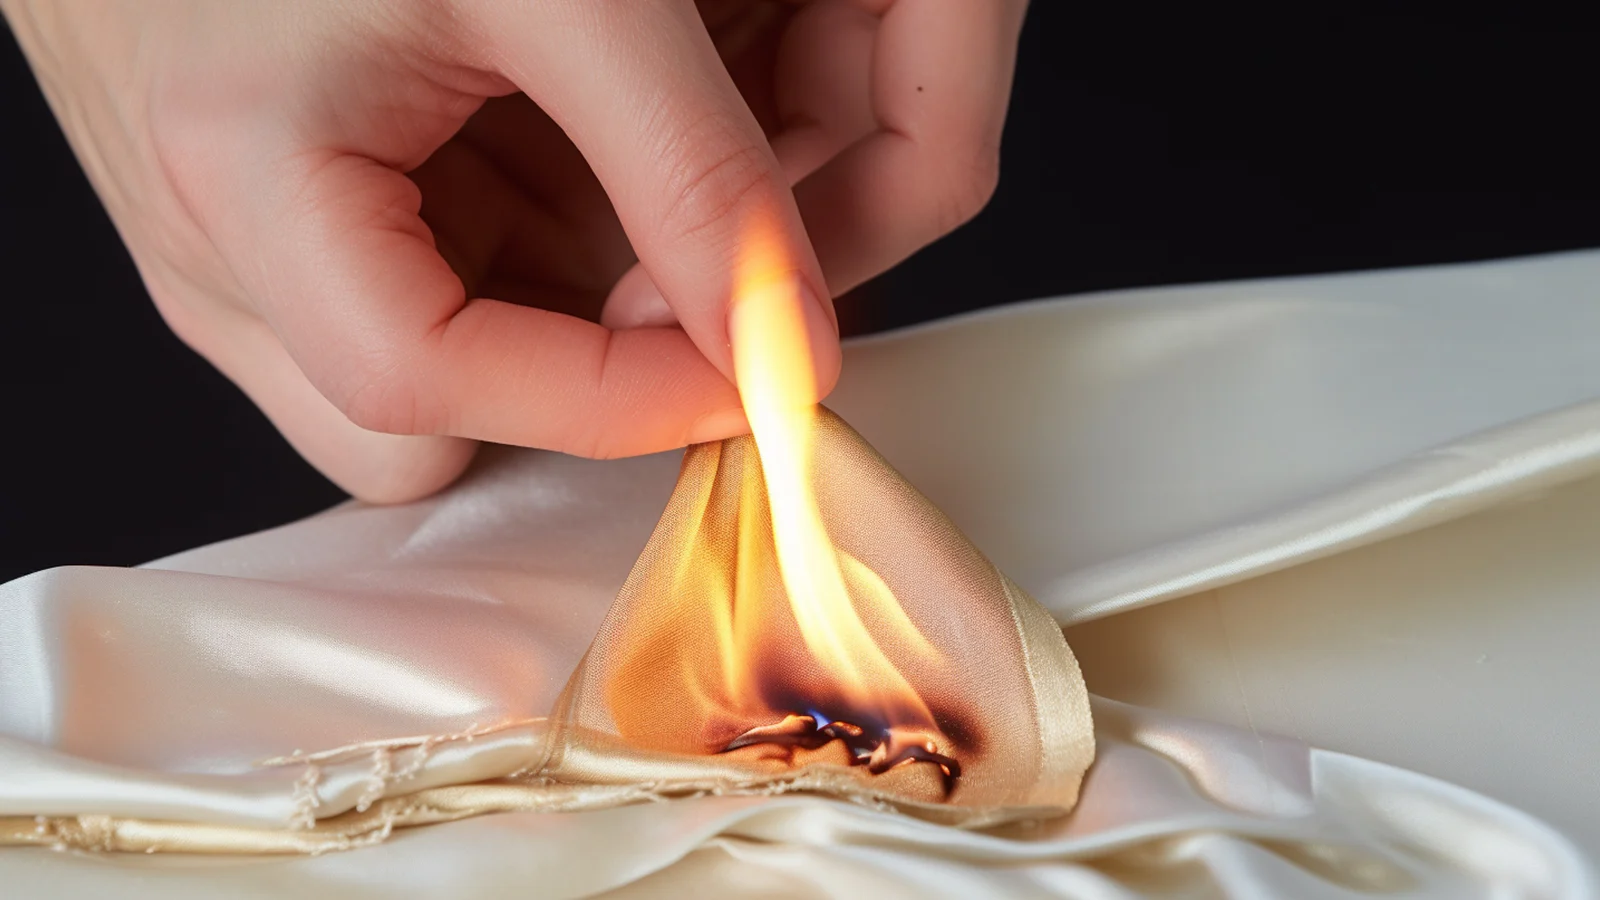 A person is burning a piece of fabric.